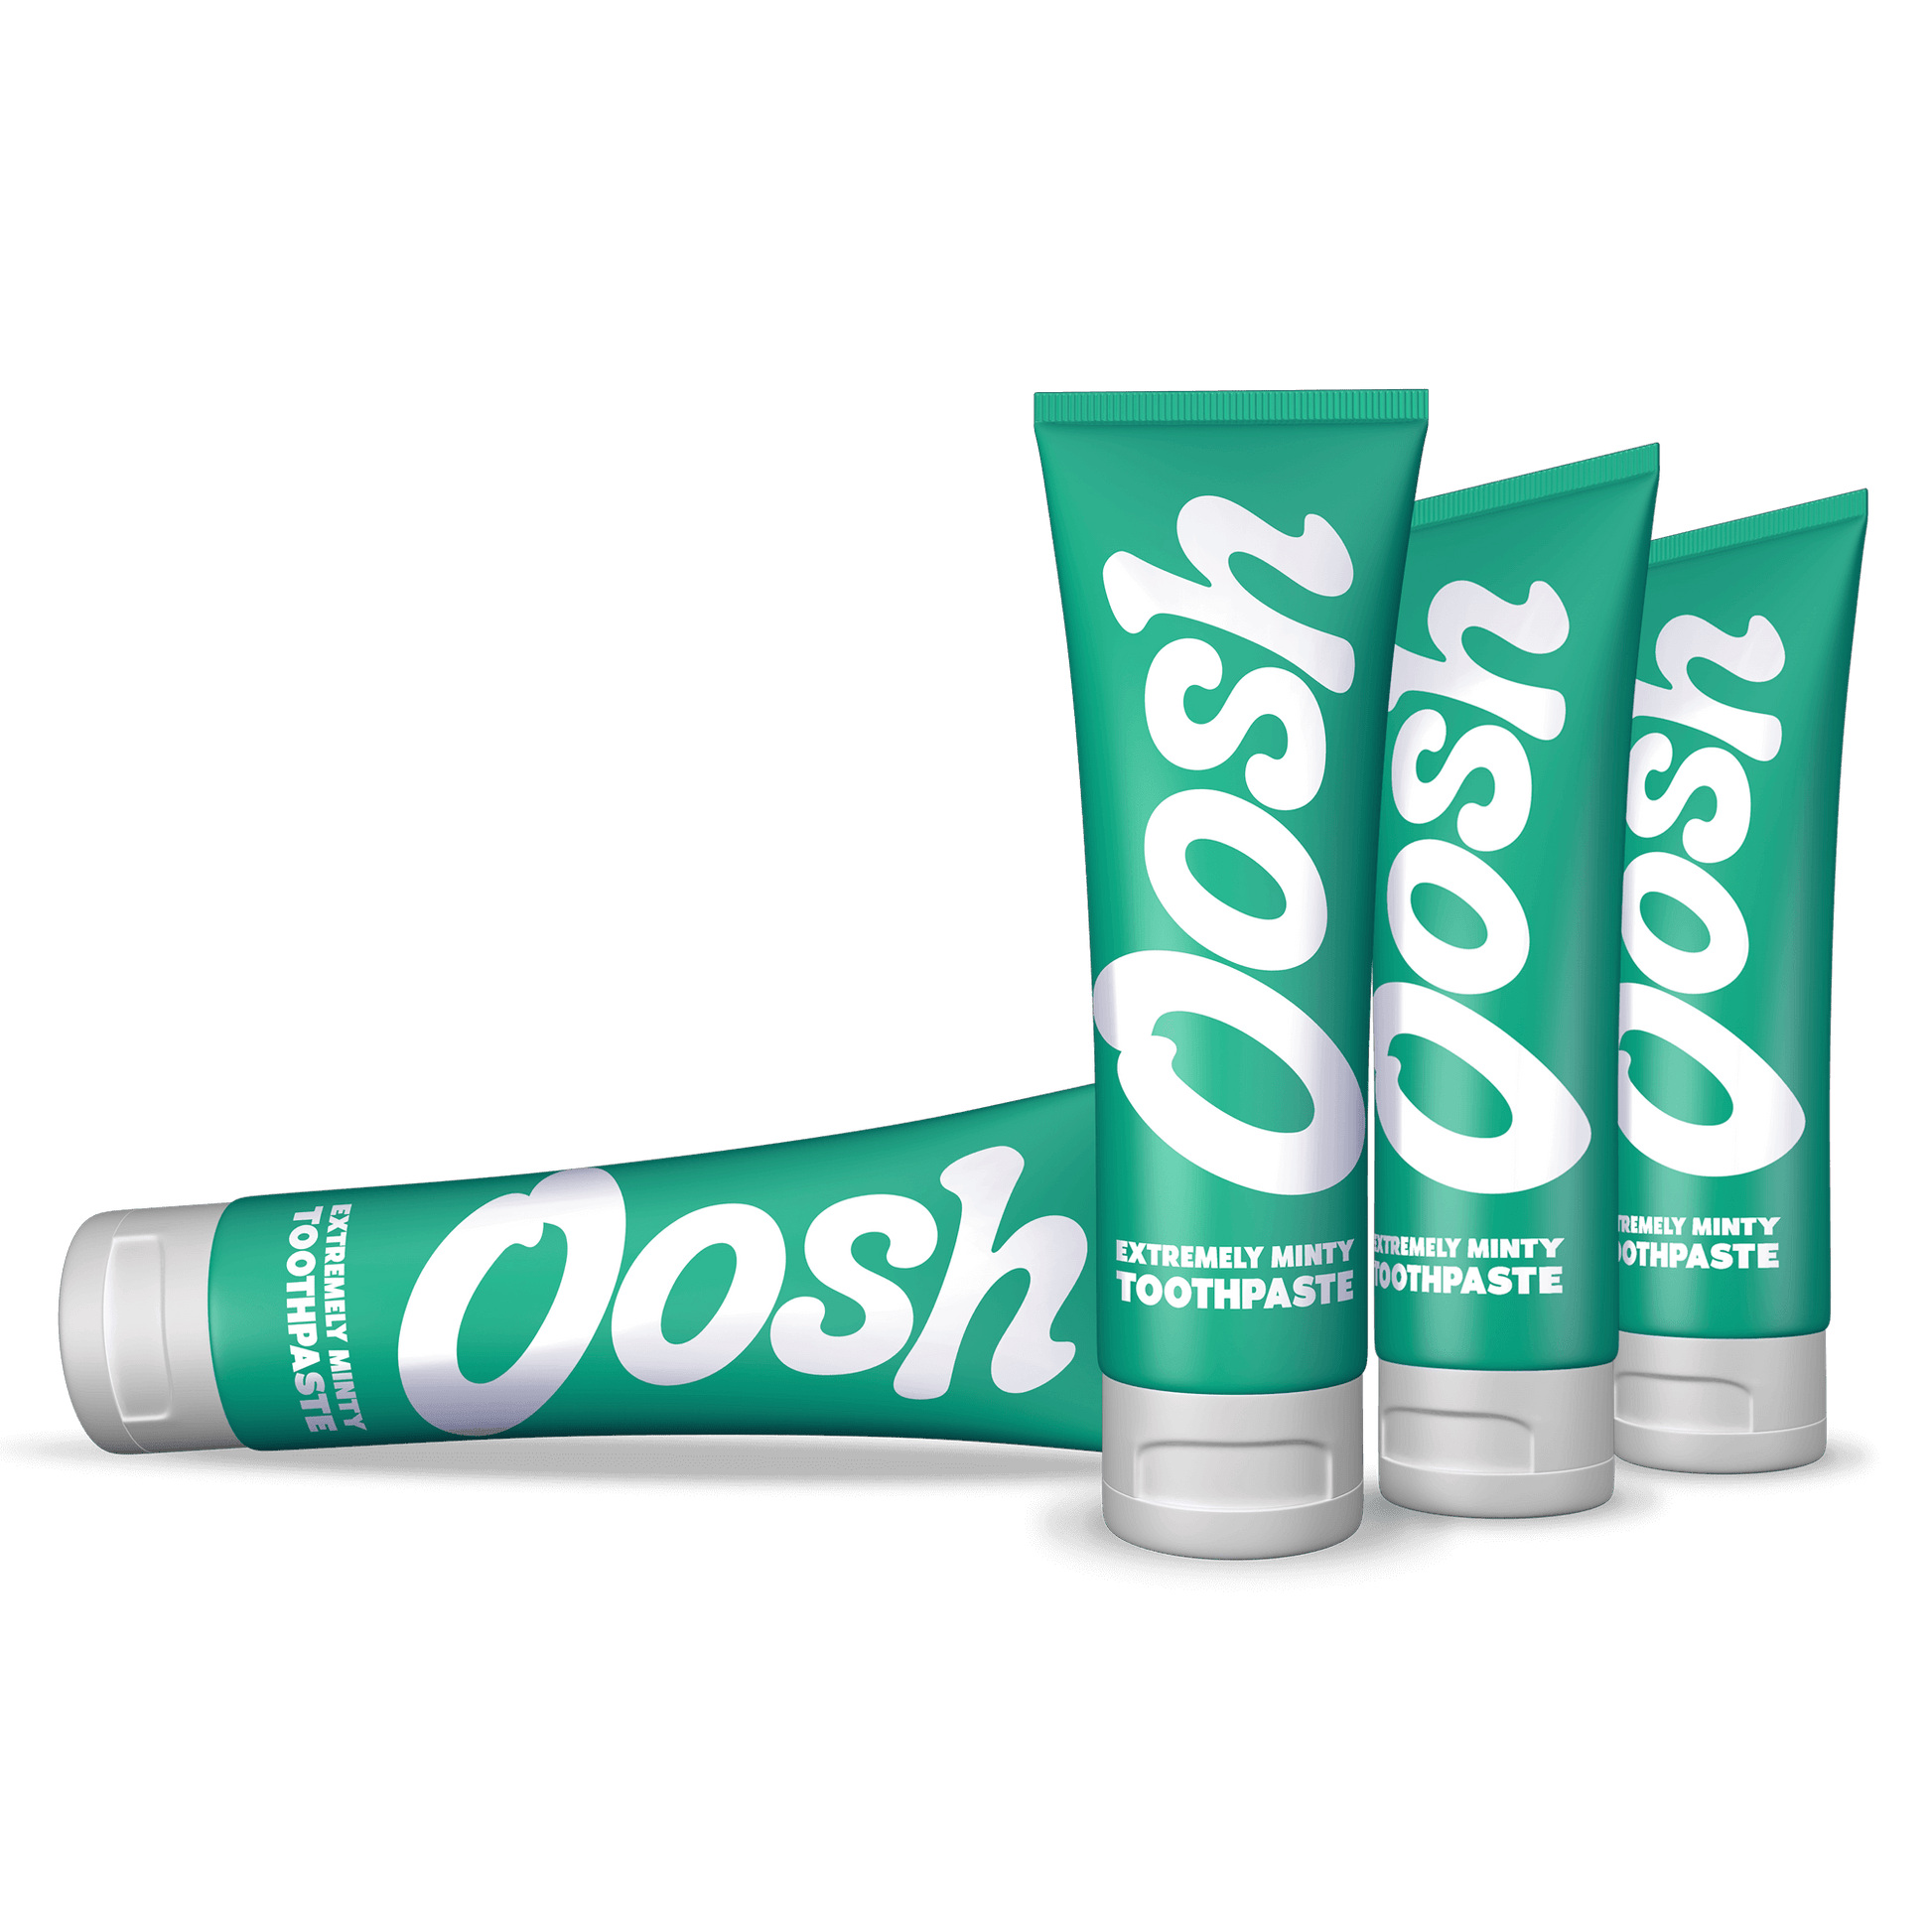 Oosh toothpaste is available in packs of 4